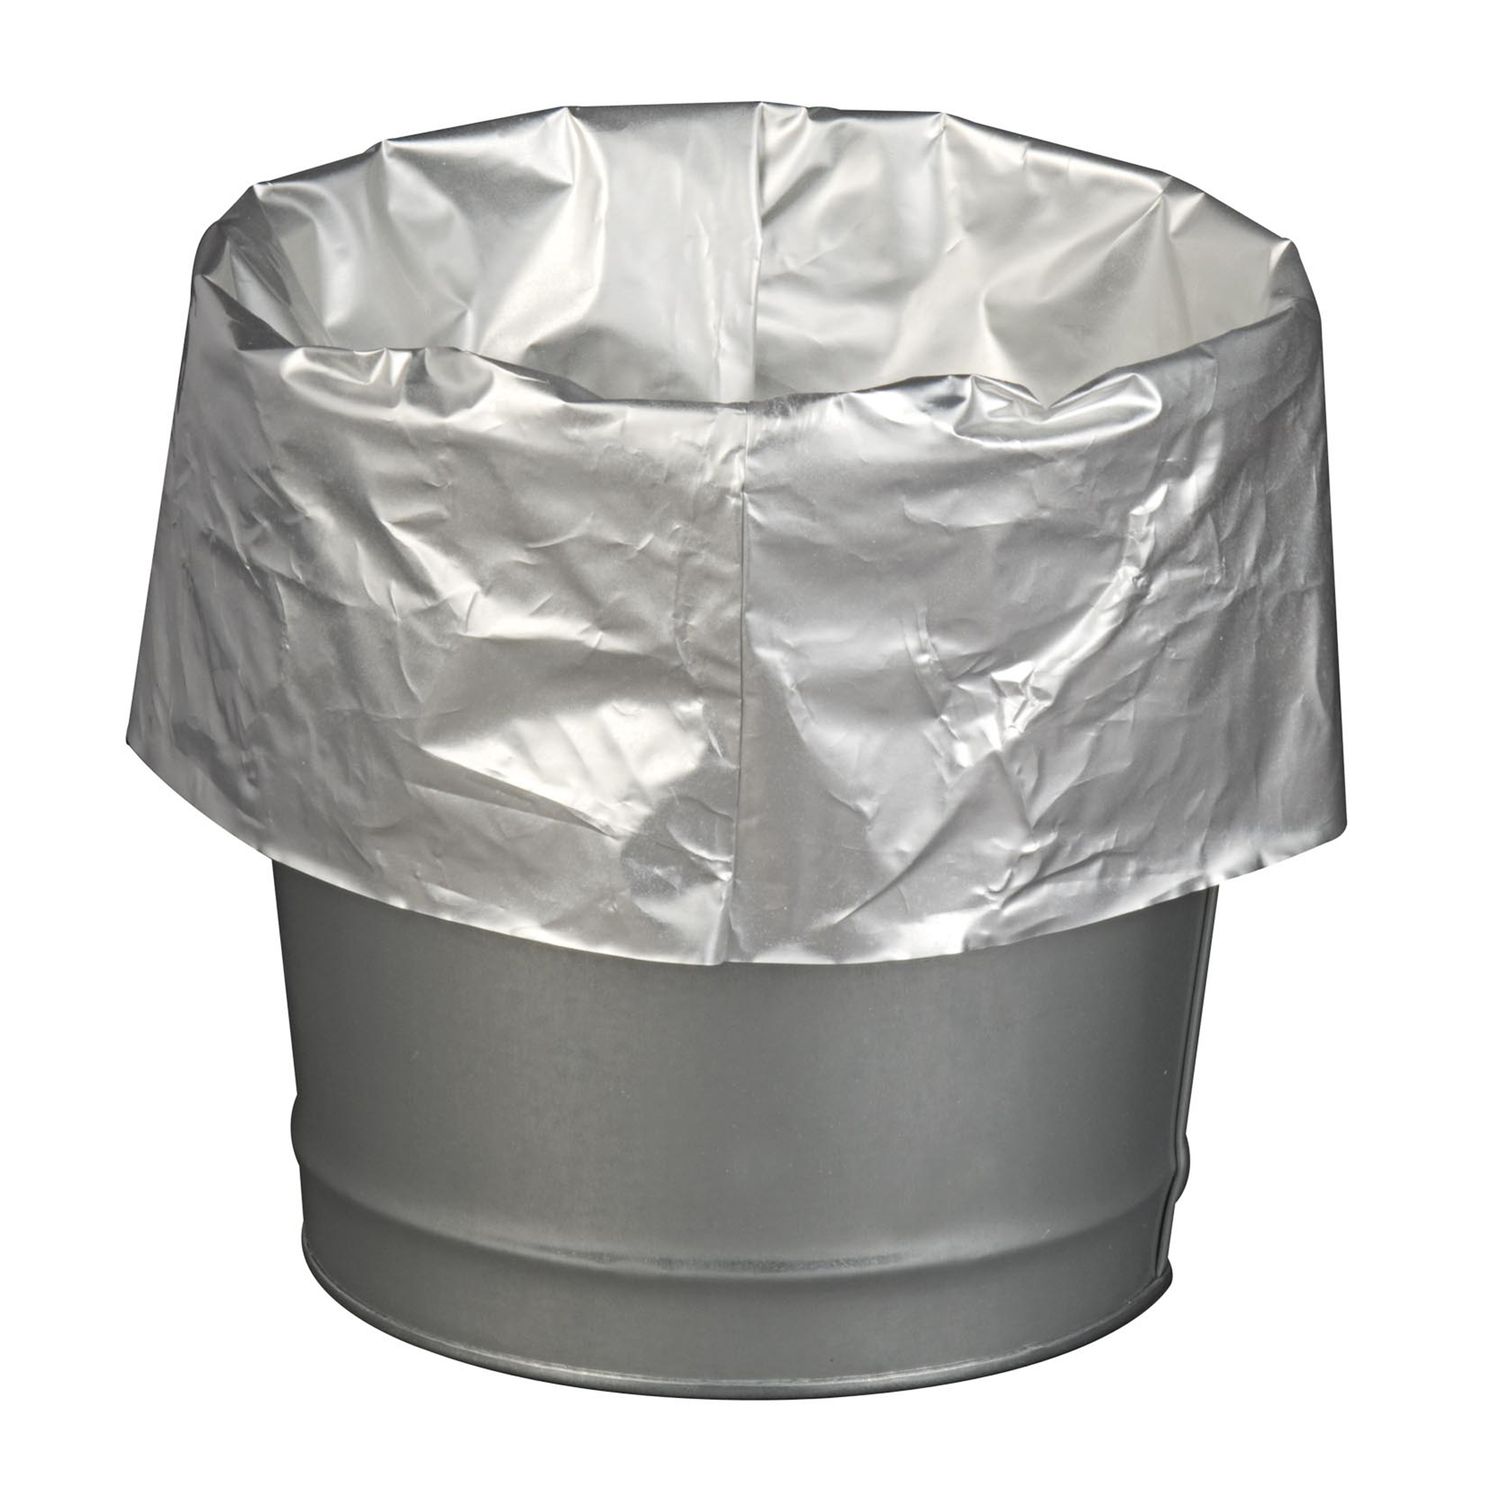 https://jsg.xcdn.nl/images/27310/justrite-268bl-disposable-bucket-liners-not-defined-full-1761.jpg?sf=1&f=&f=rs:fit:1500:1500/g:ce&s=1